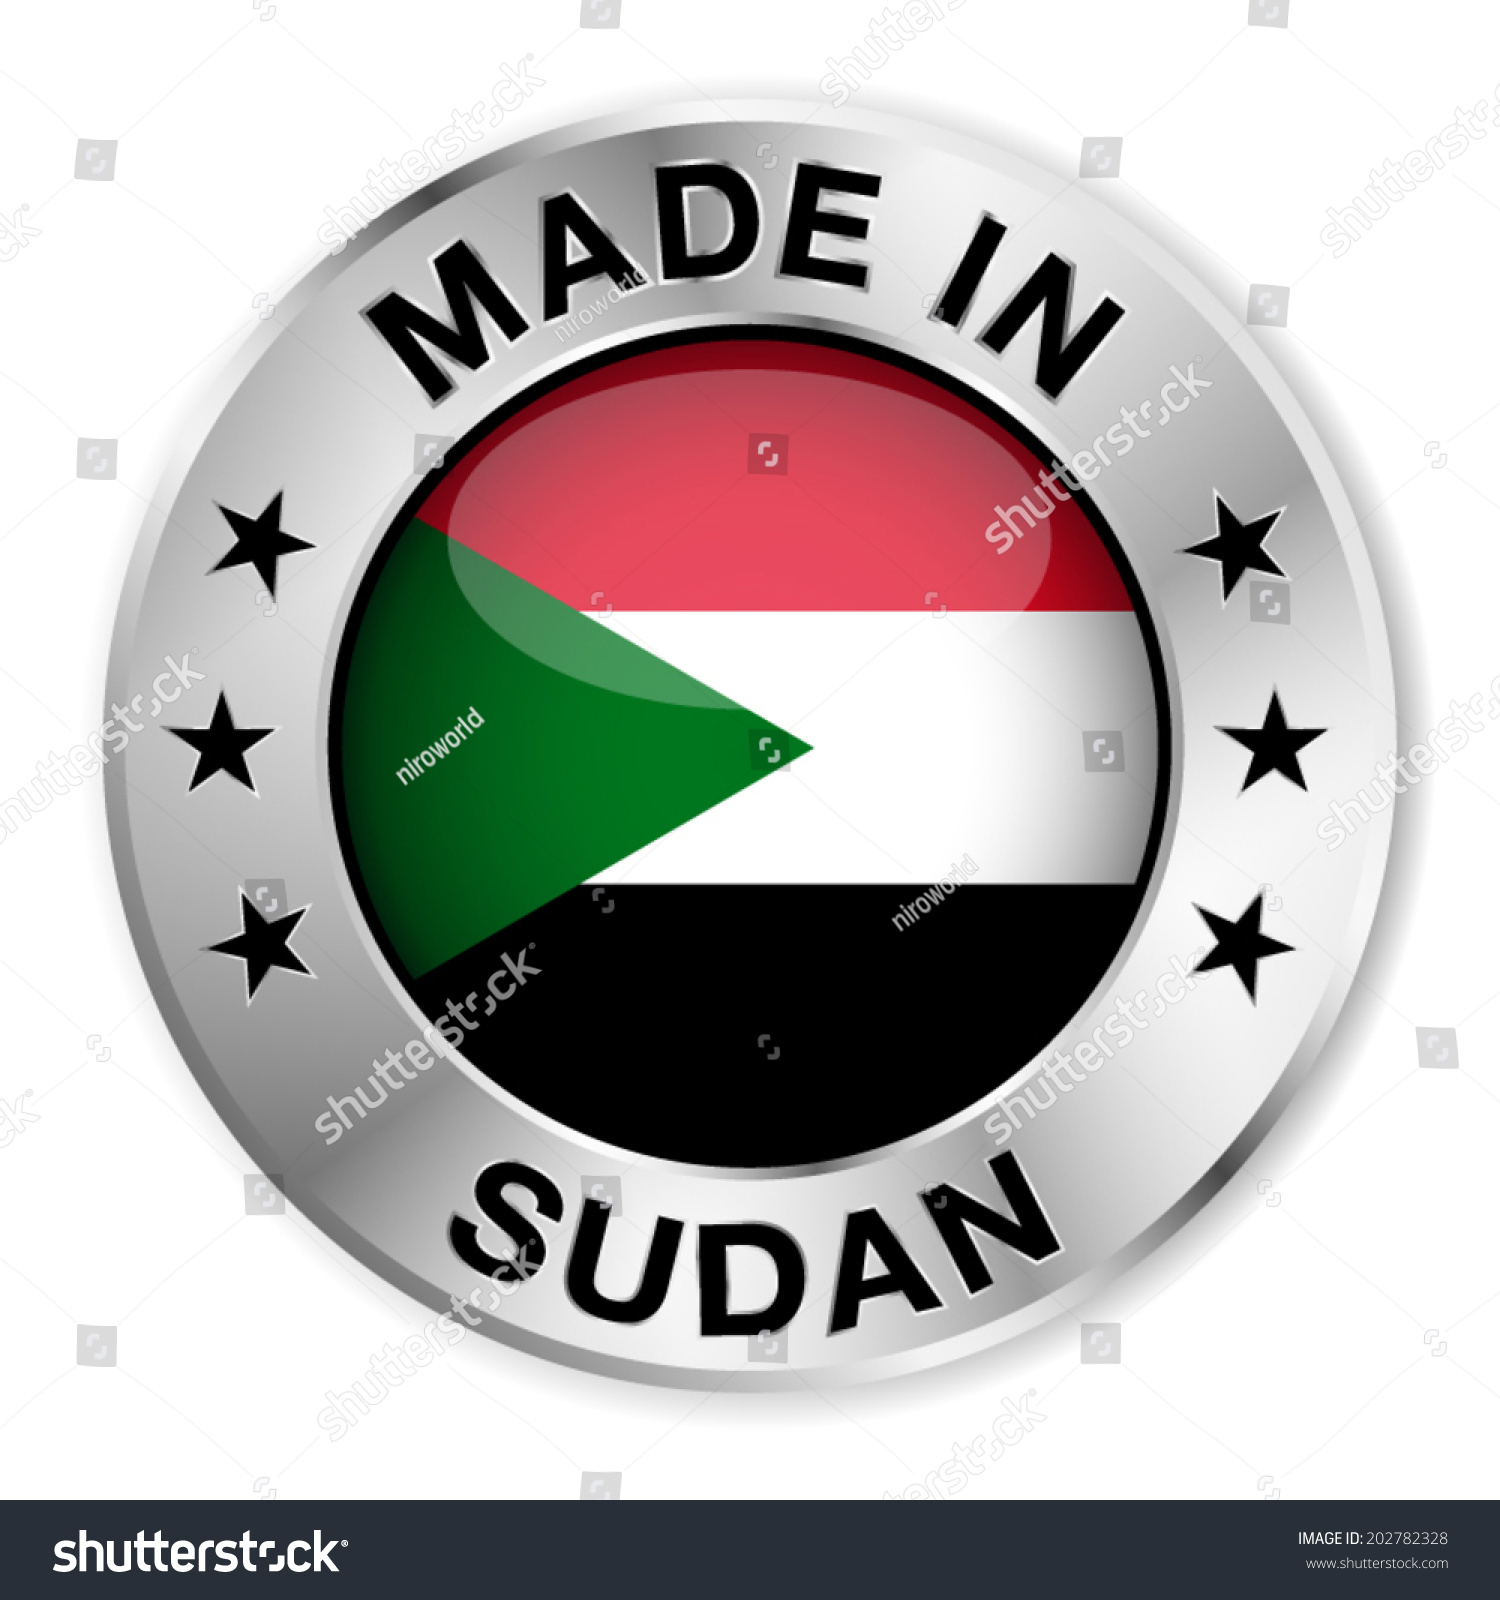 stock-vector-made-in-sudan-silver-badge-and-icon-with-central-glossy-sudanese-flag-symbol-and-stars-vector-202782328.jpg